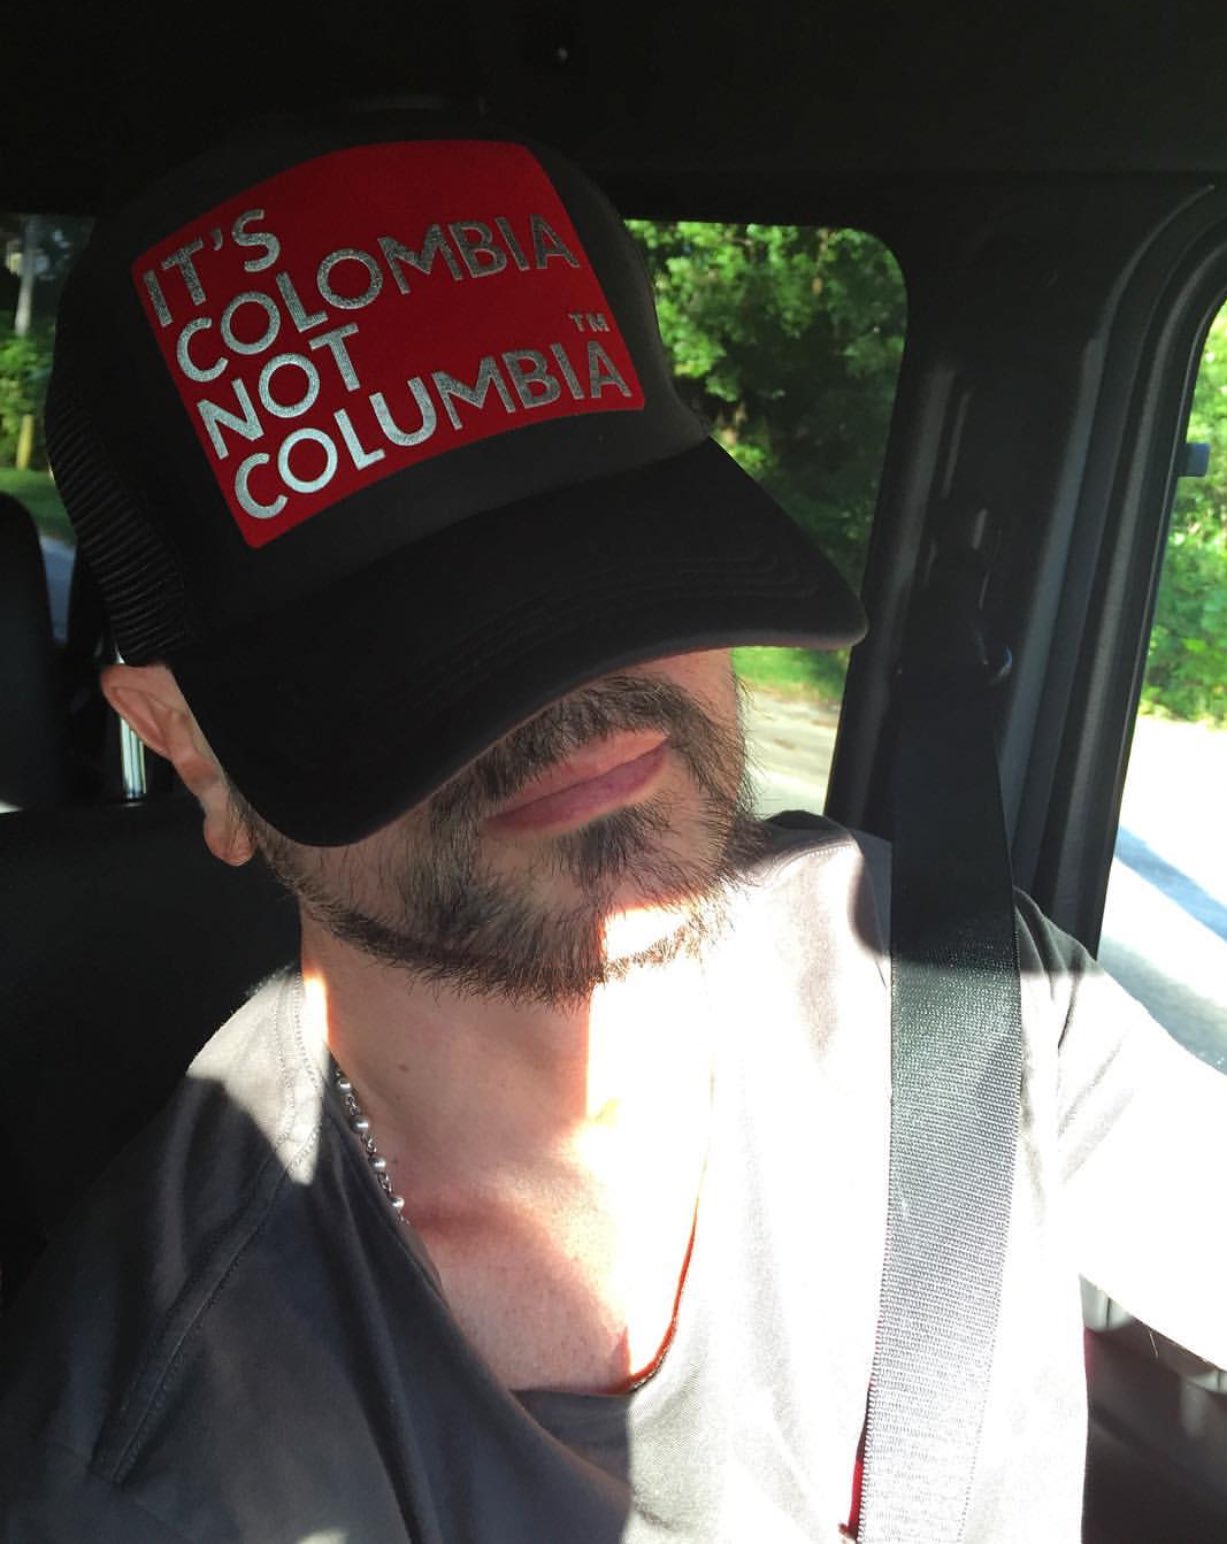 JUANES on X: It's Colombia not Columbia.  / X